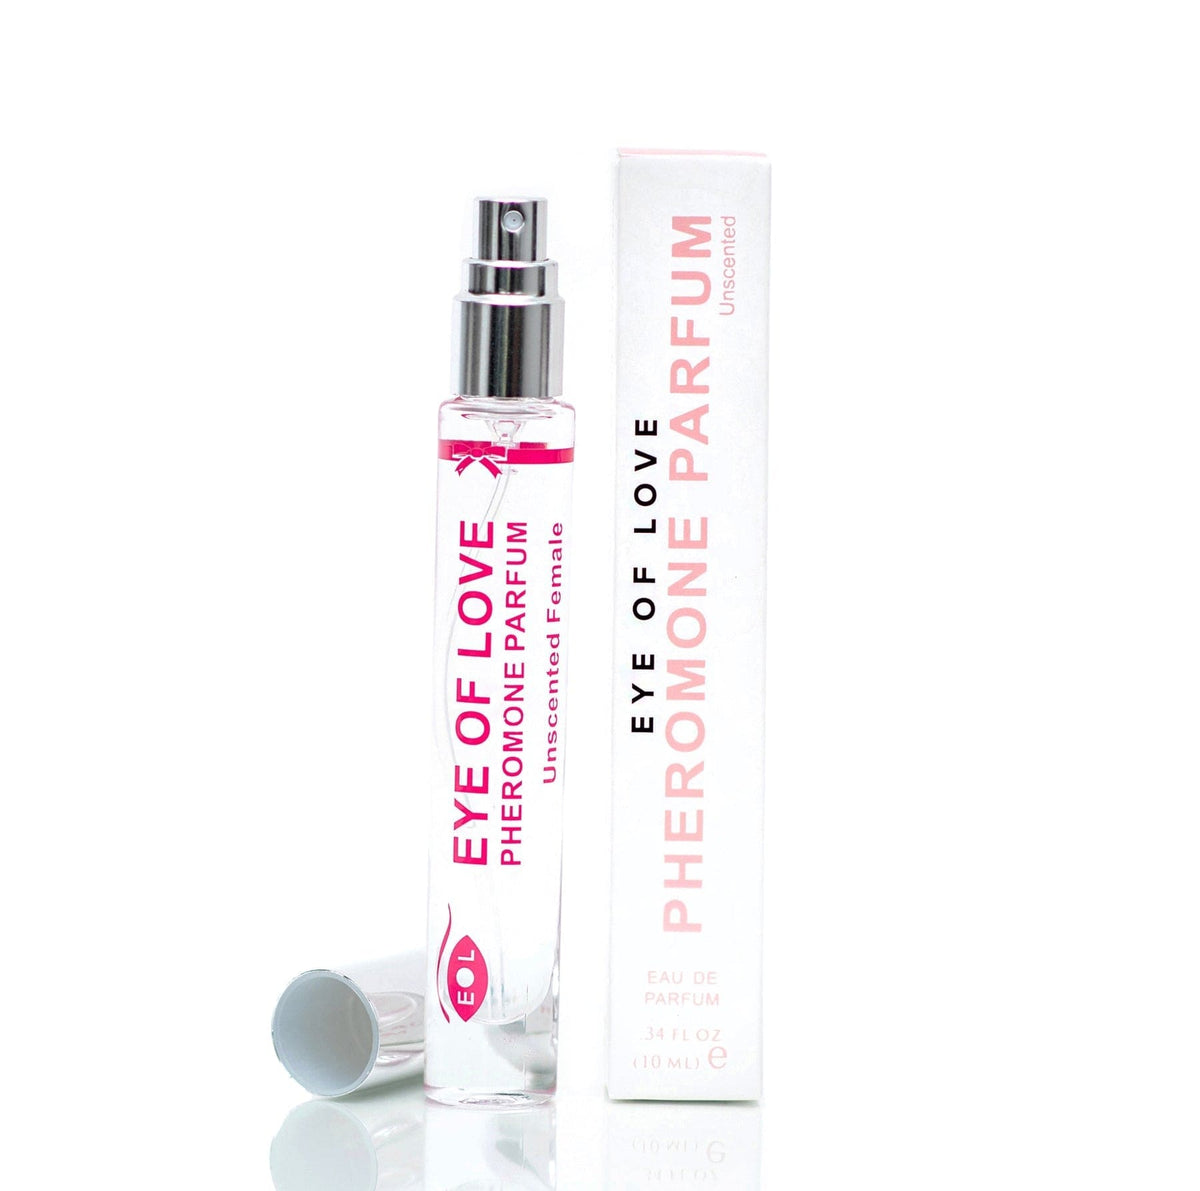 Attract Him - Unscented Pheromones Lubes EYE OF LOVE   